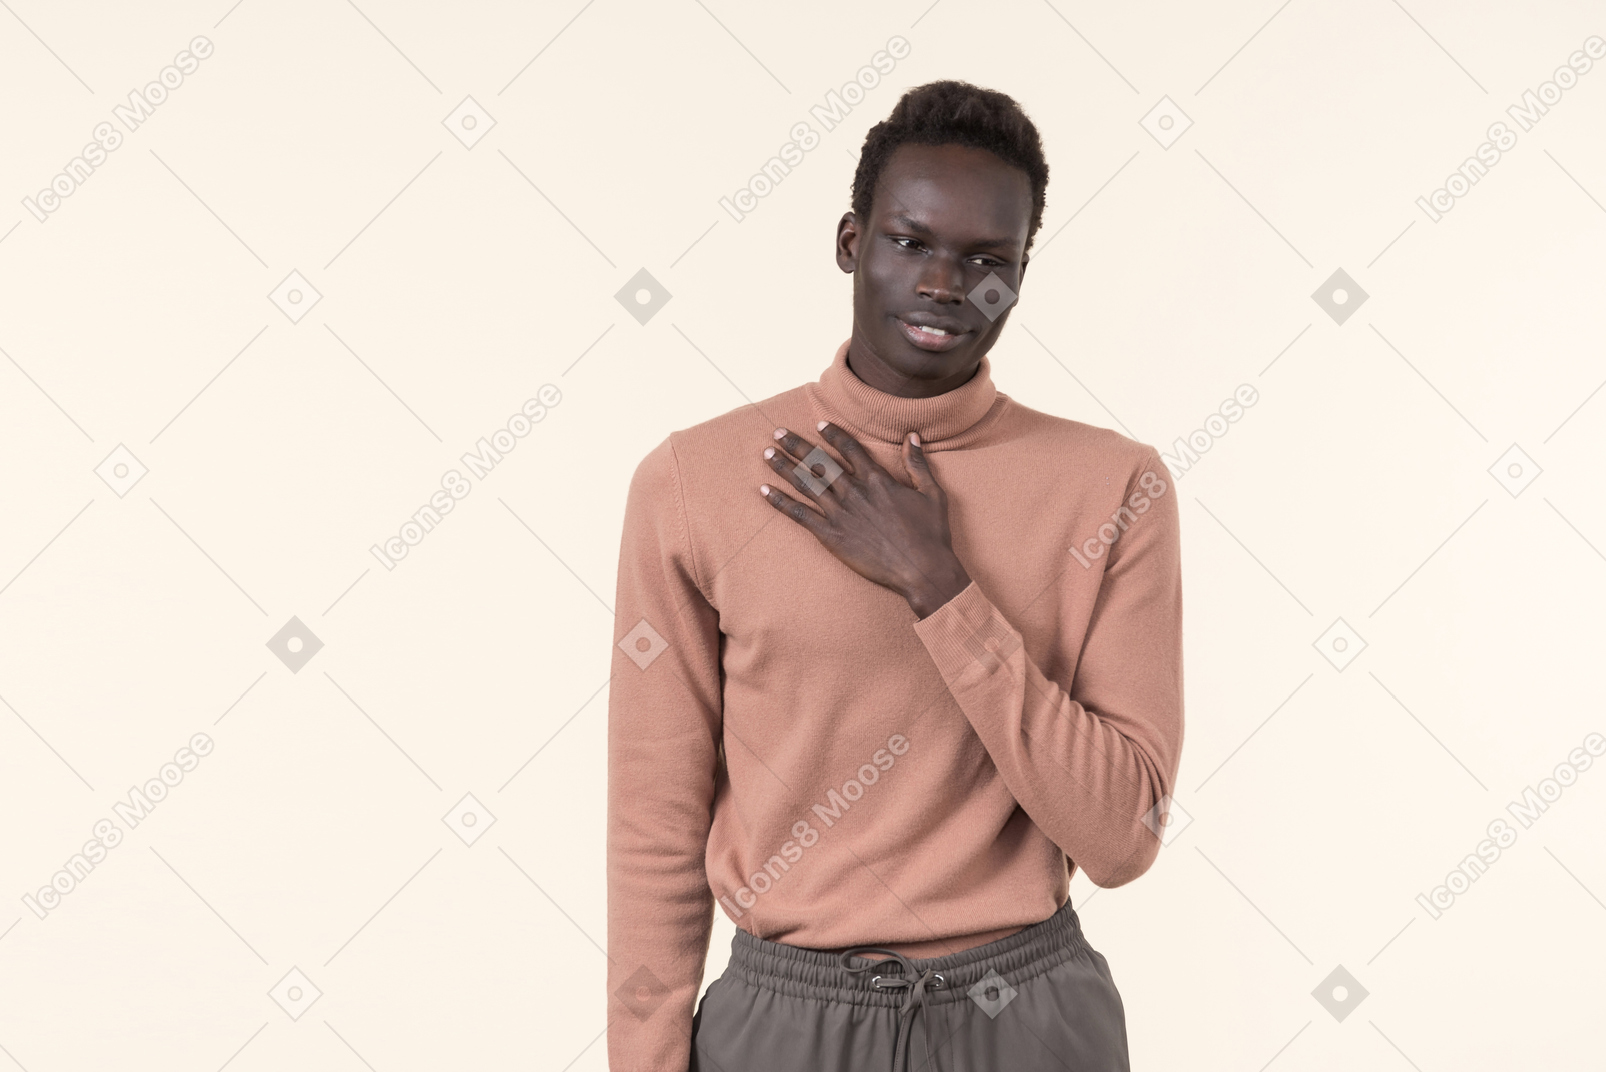 A young black man in a beige turtleneck and grey sweatpants standing casually on the white background